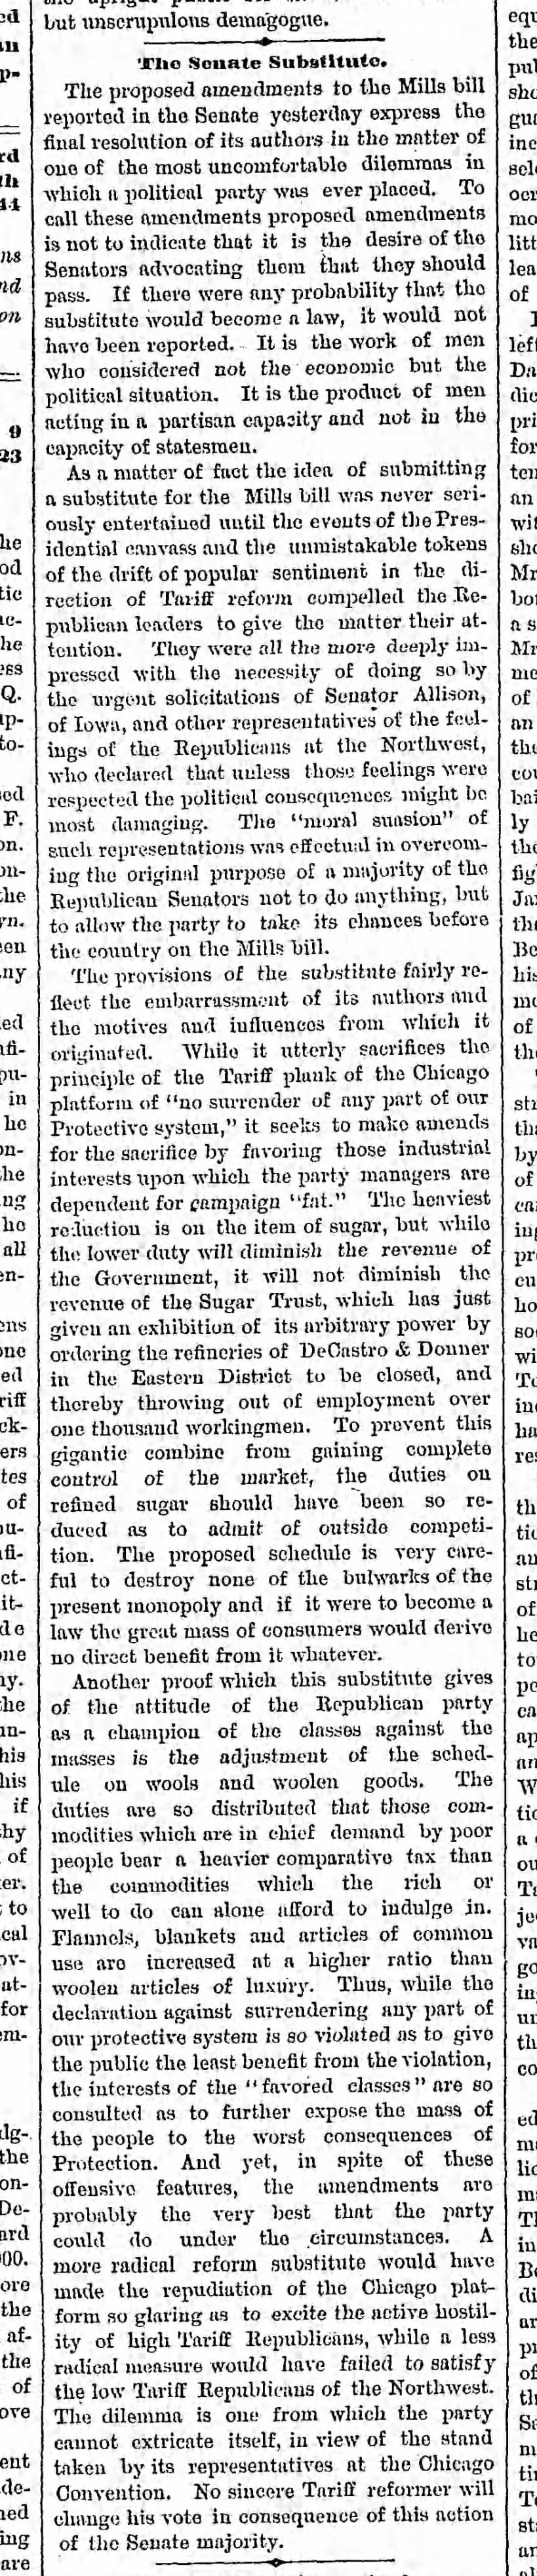 The Senate Substitute, Brooklyn Daily Eagle, Oct. 4, 1888, at 4 (second copy)